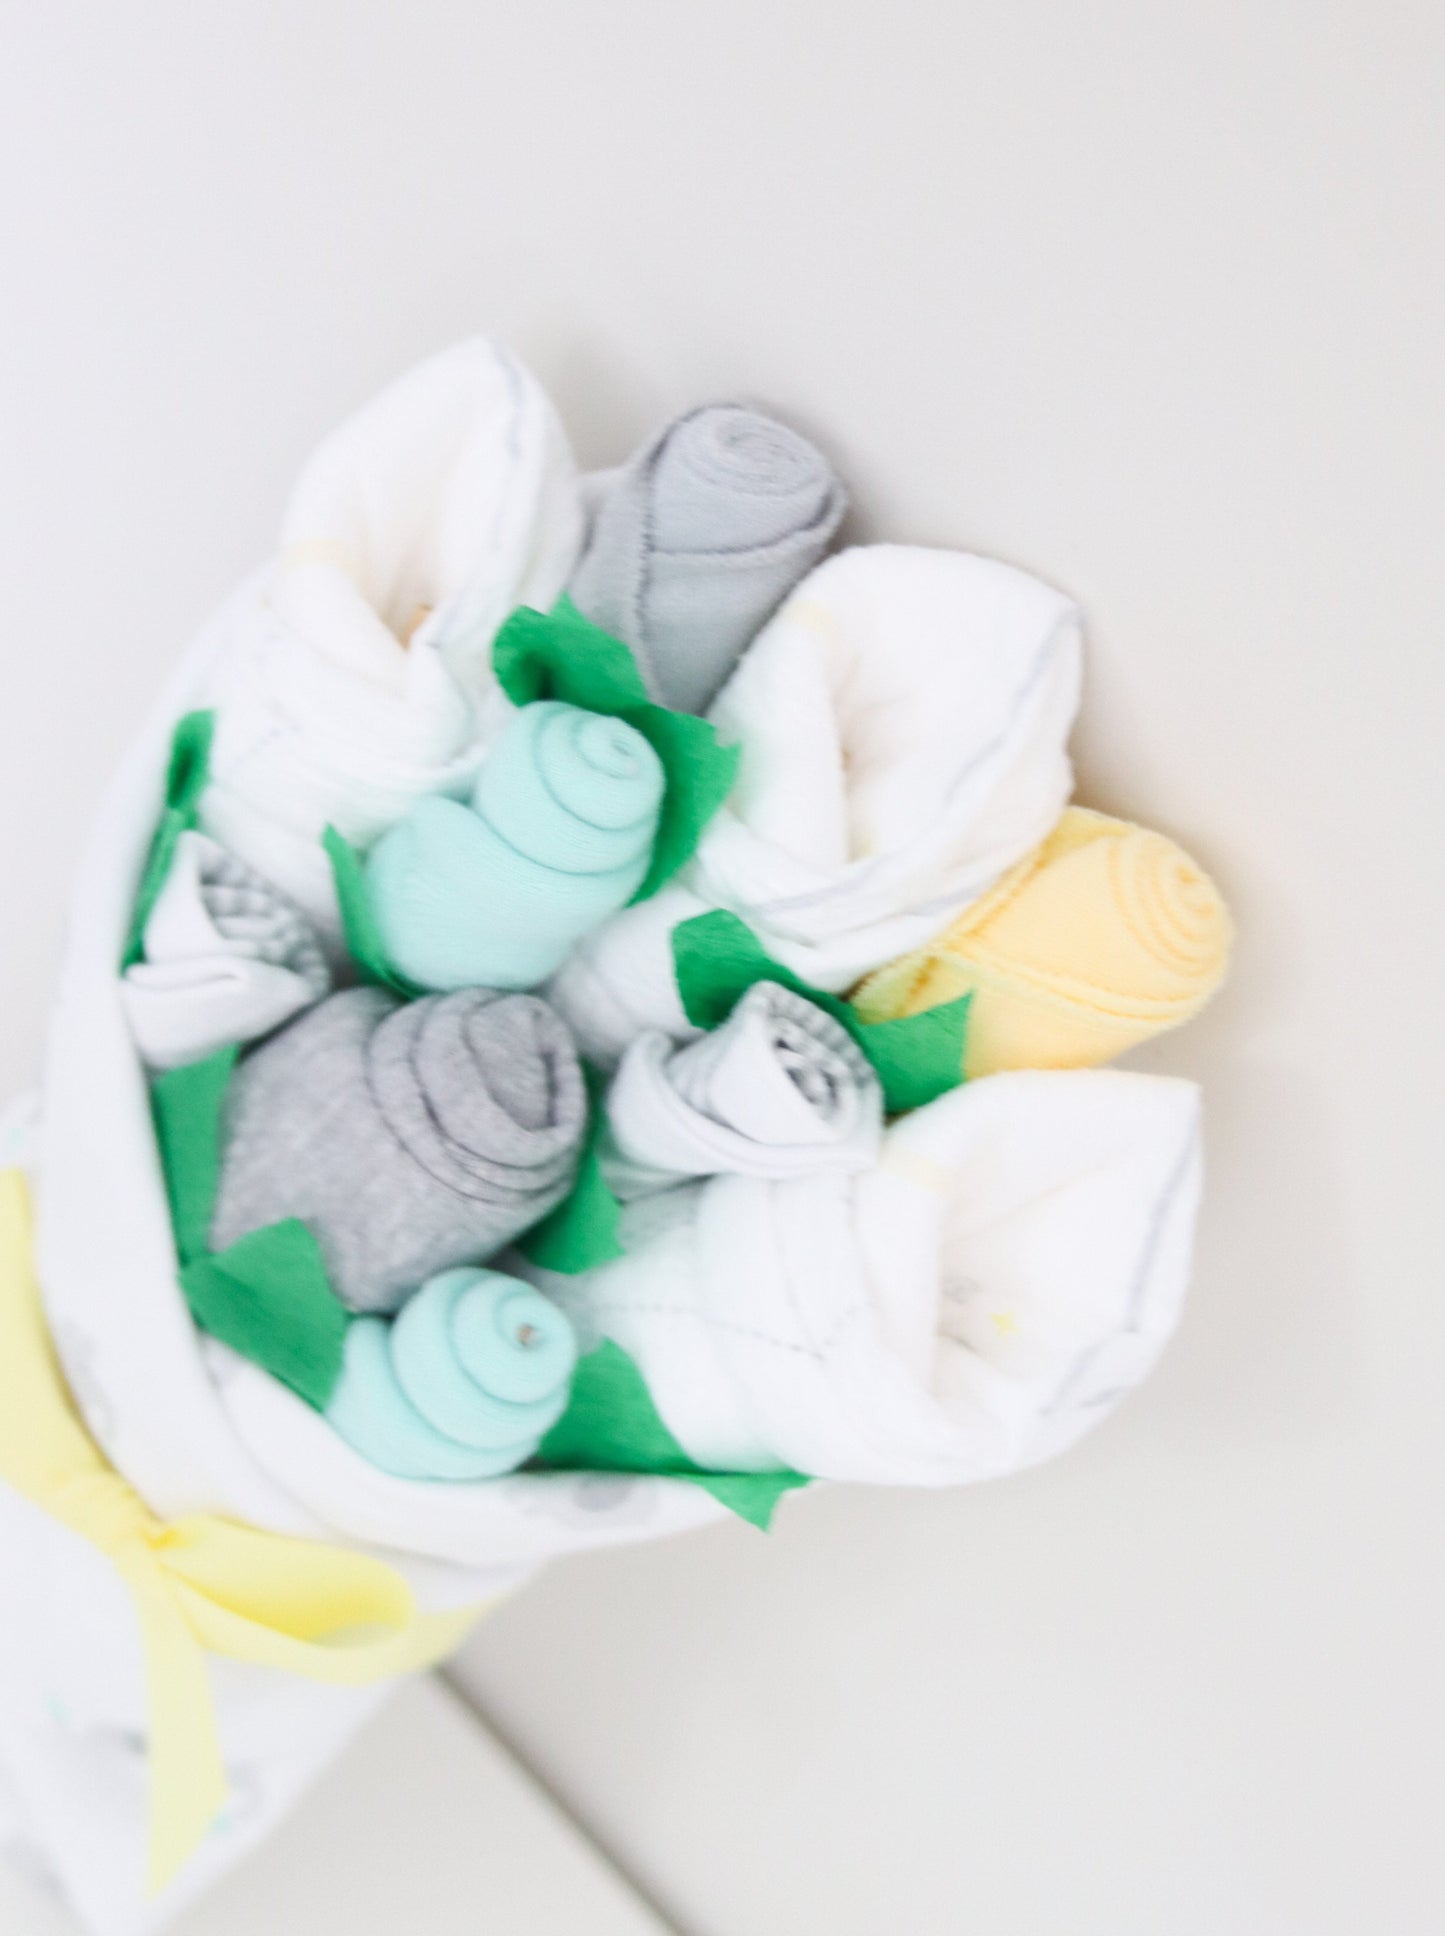 neutral baby gift clothing bouquet